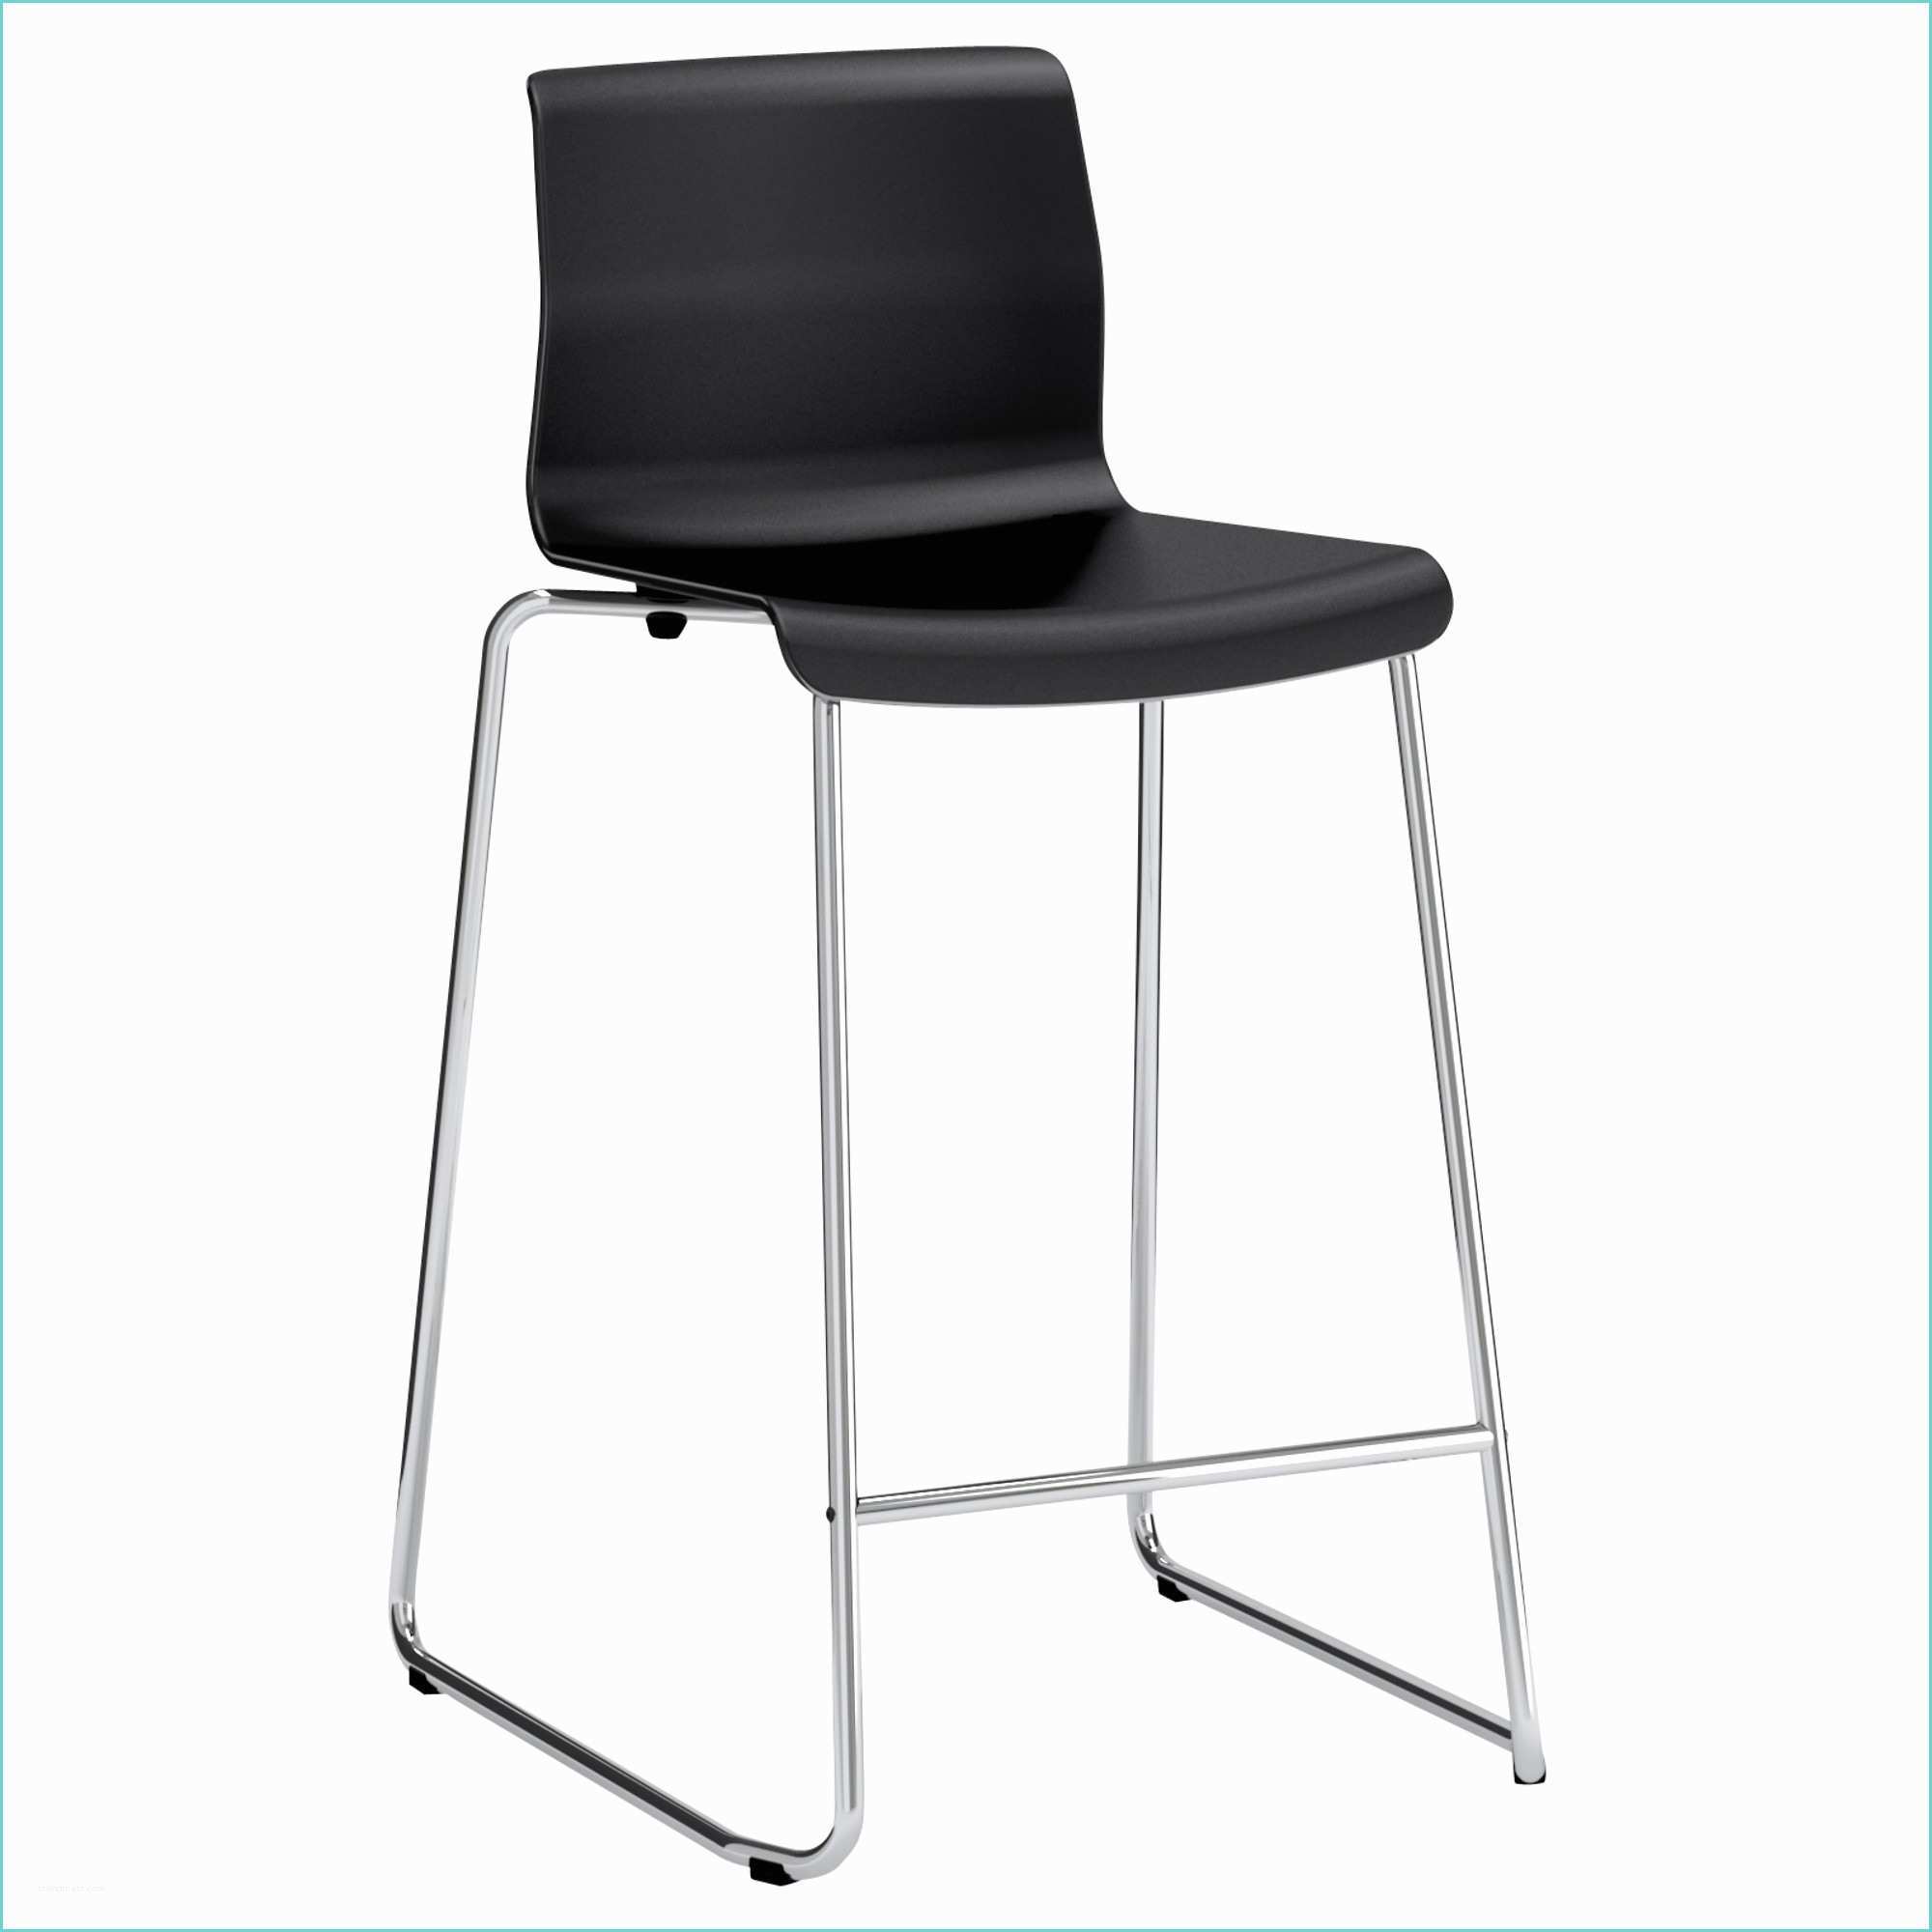 Chaises Bistrot Ikea Chaise Bistrot Ikea Simple Chaise Bistrot Ikea Sur Idee